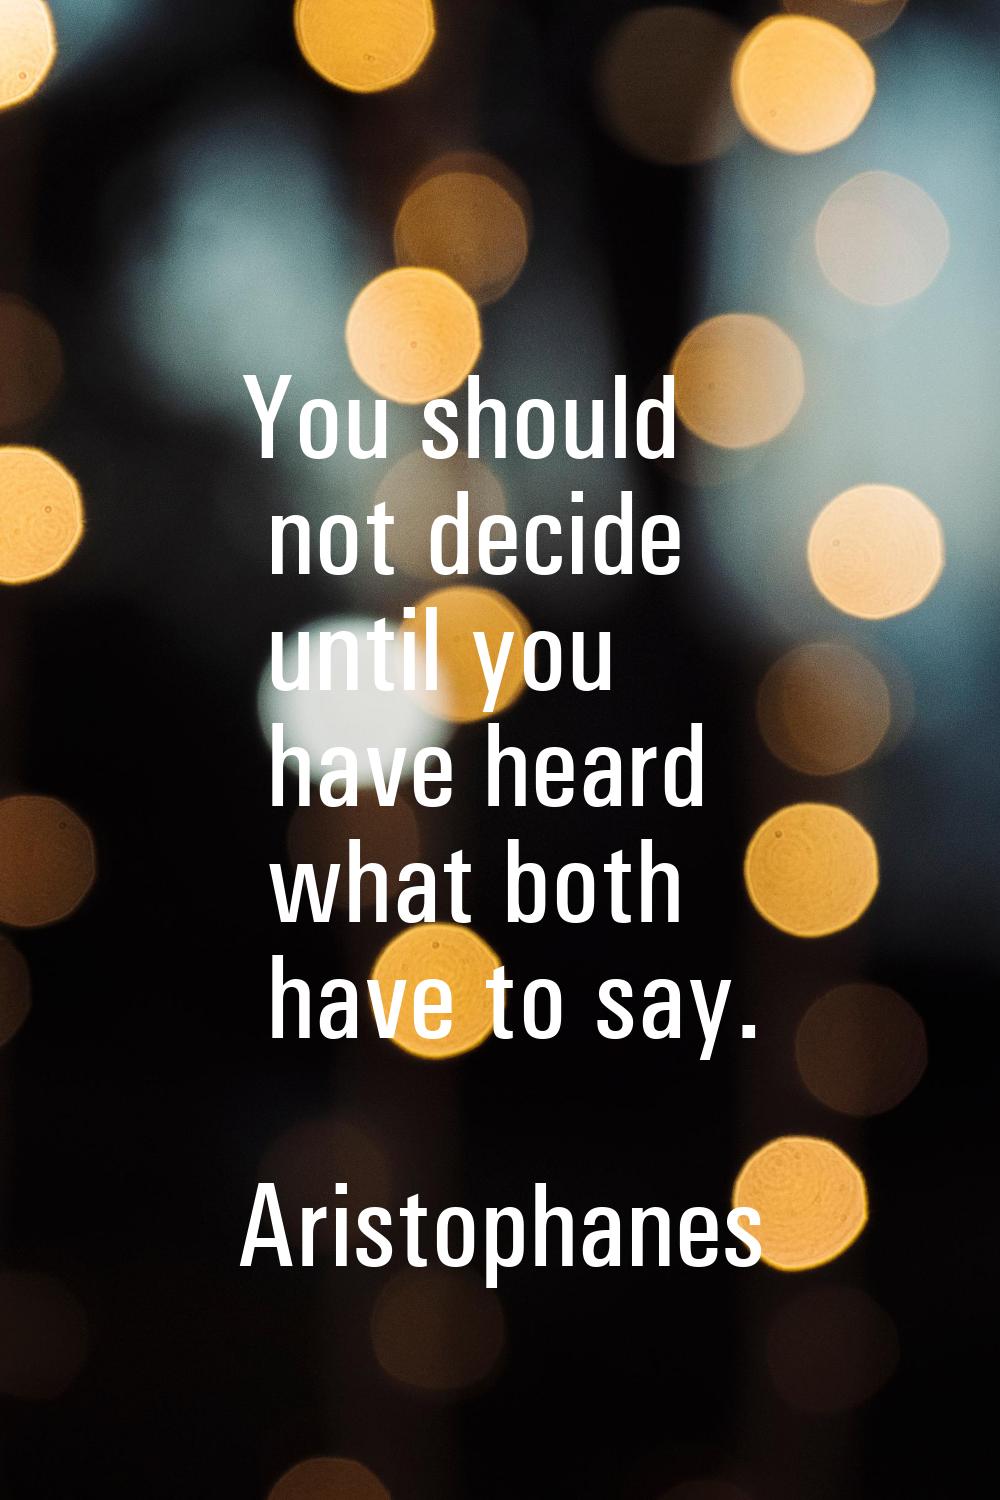 You should not decide until you have heard what both have to say.